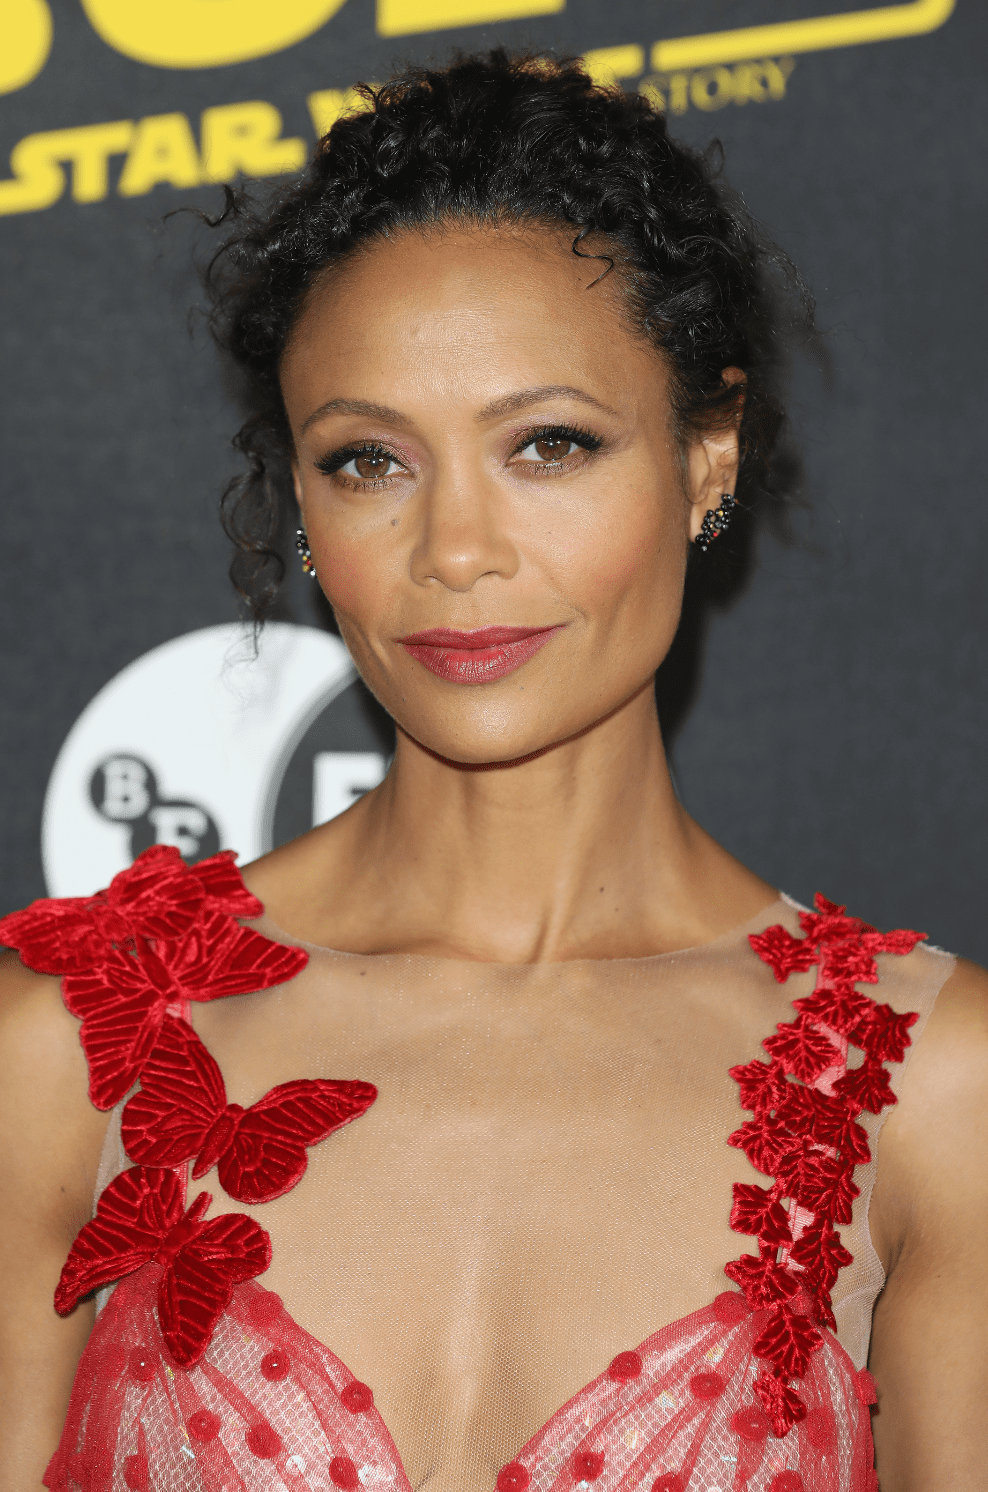 Thandie Newton attends BFI screening of "Solo: A Star Wars Story" at BFI Southbank on May 23, 2018 in London, England. | Source: Getty Images